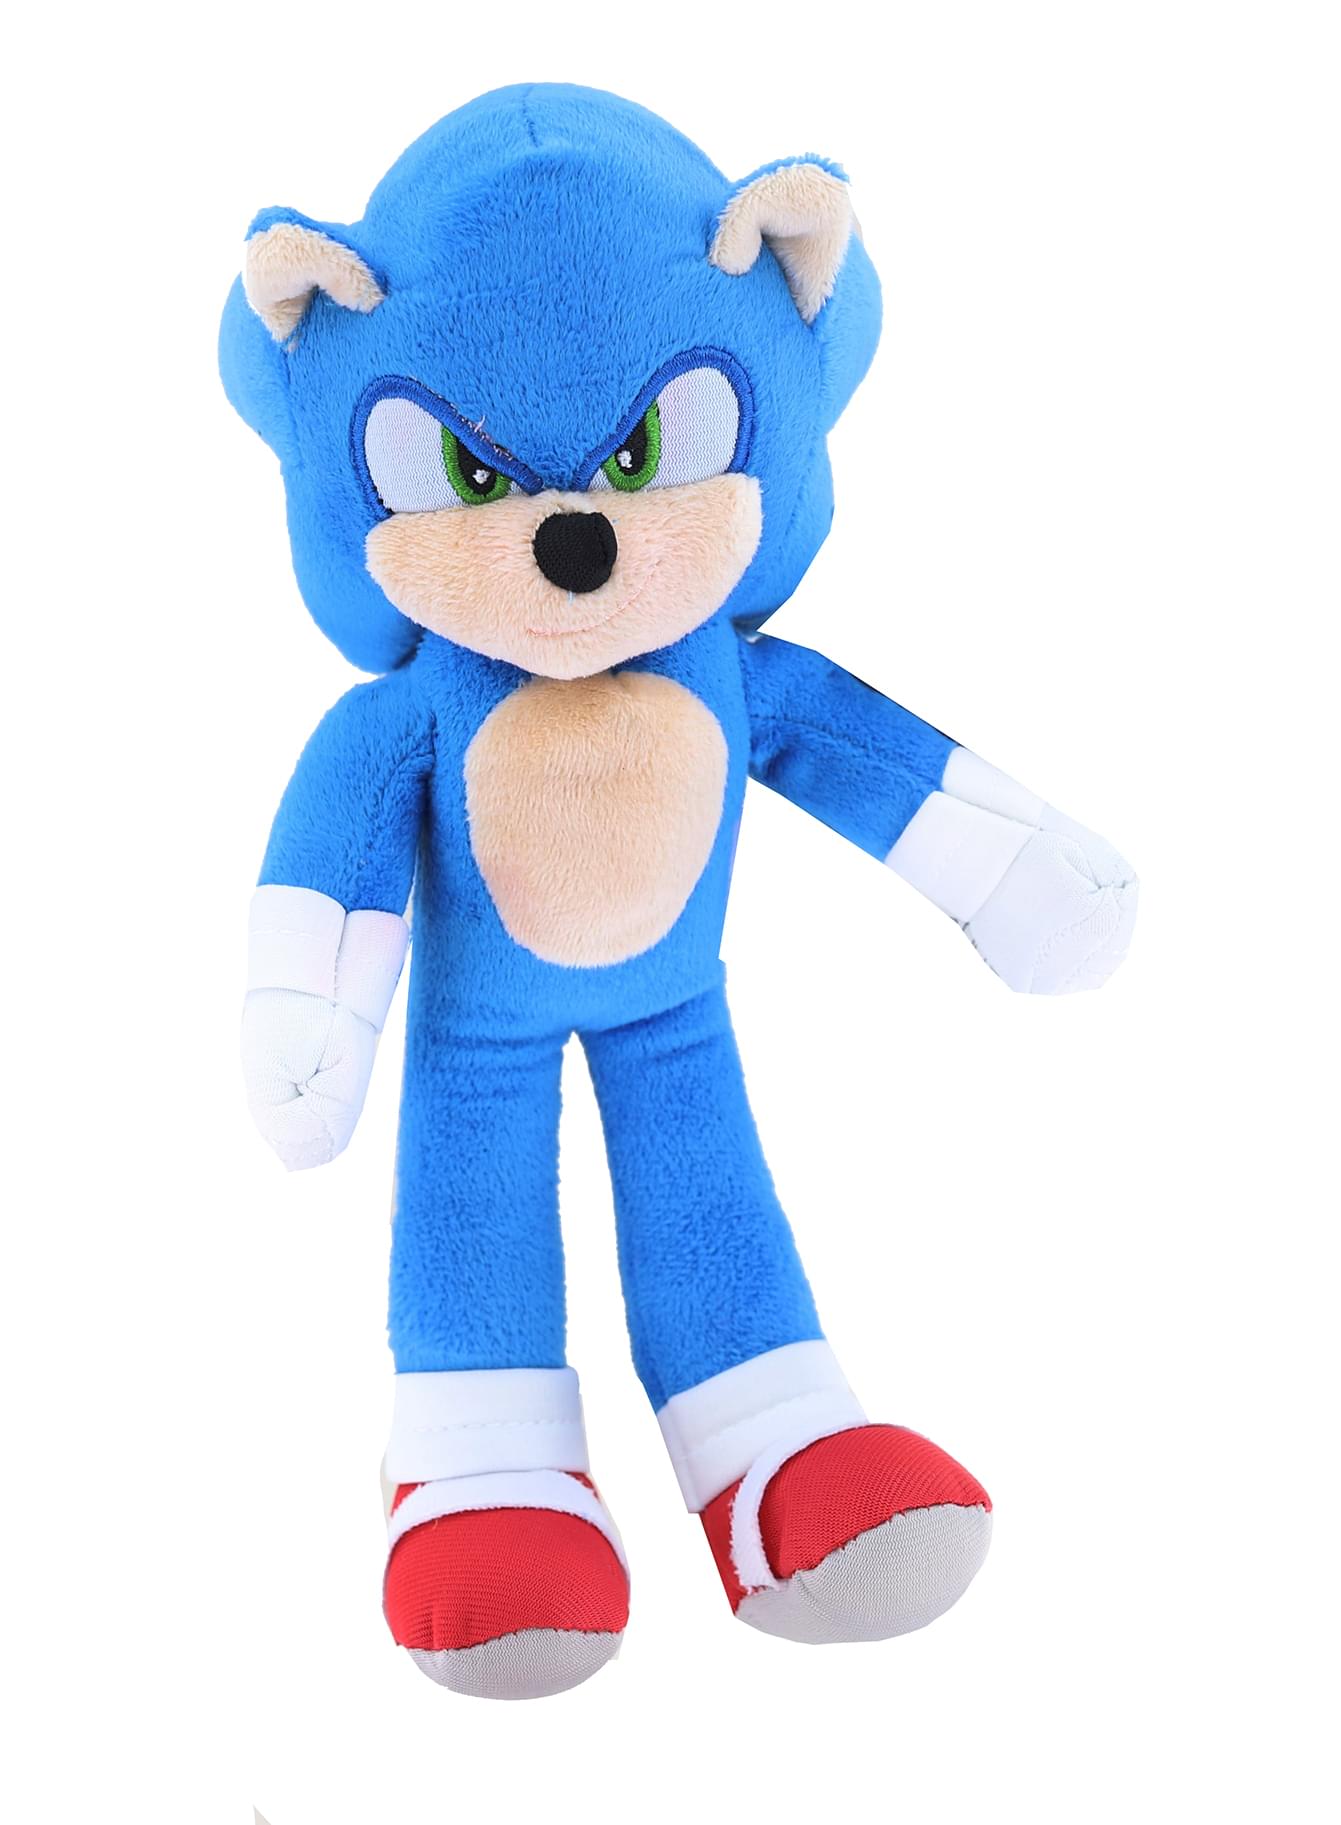  Sonic The Hedgehog 2 The Movie Plush Figure Collection